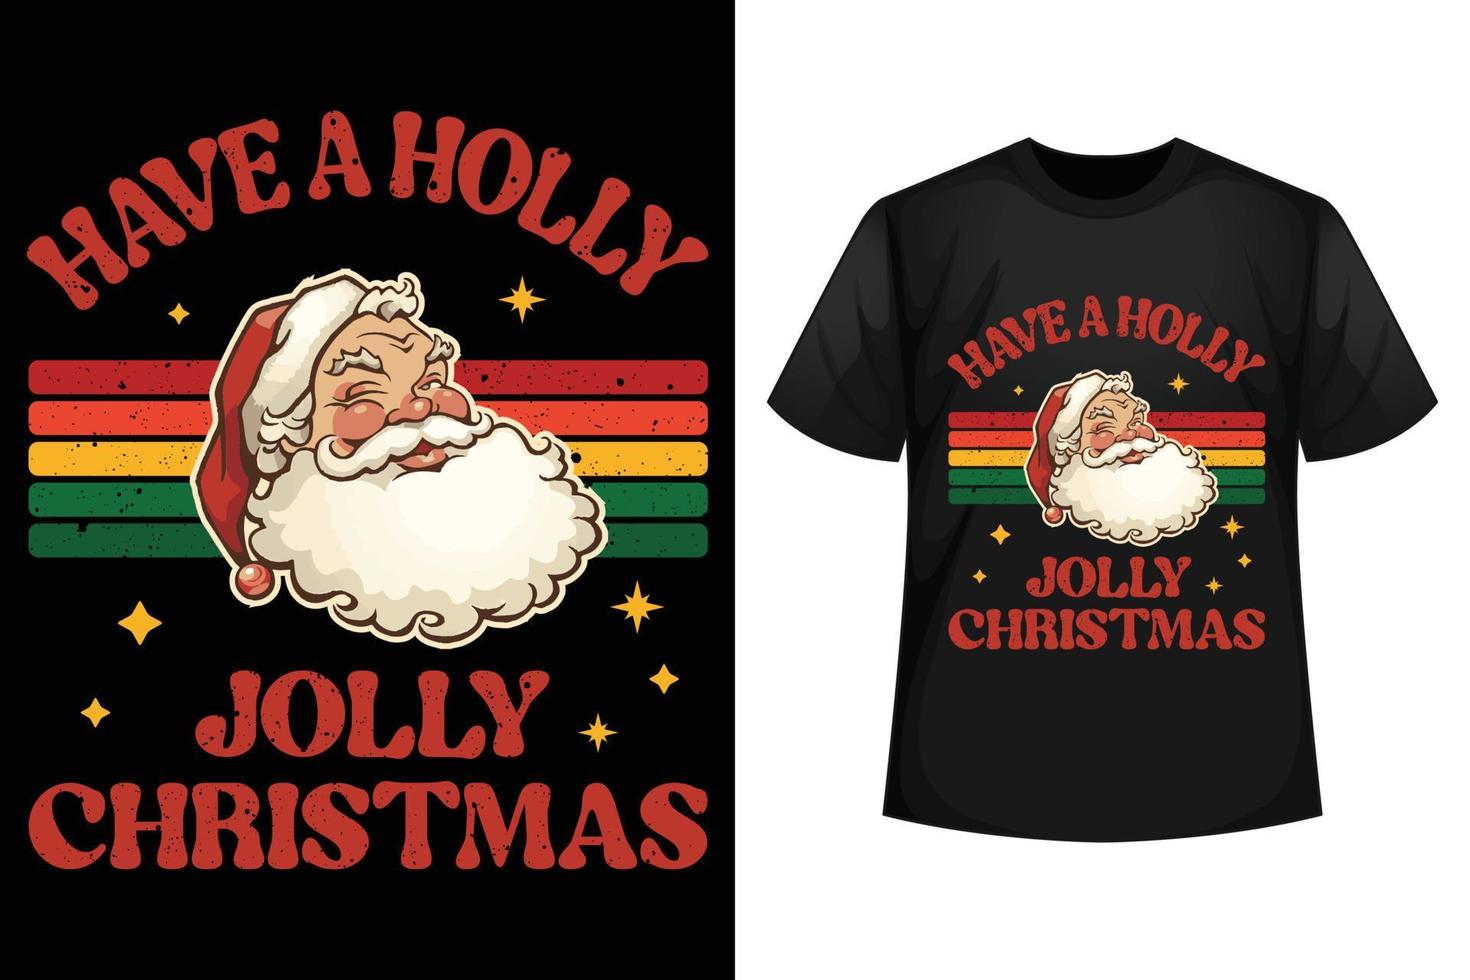 Have a Merry Christmas - Christmas T-Shirt Design Template vector